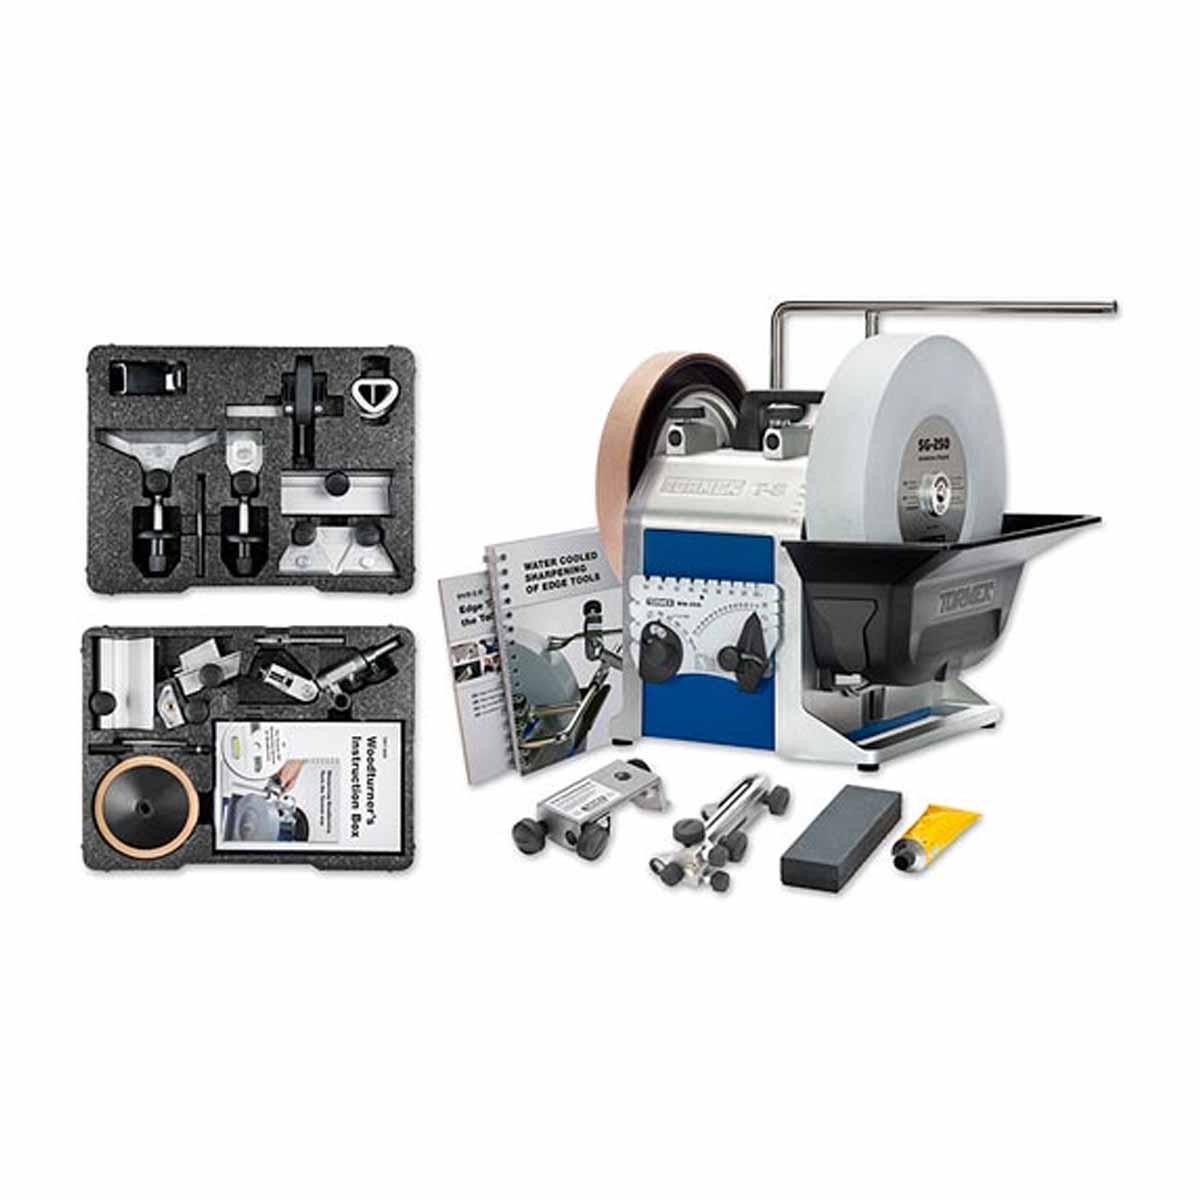 Tormek T-8 Sharpening System + HTK-806 & TNT-808 showing all accessories with both these sets.